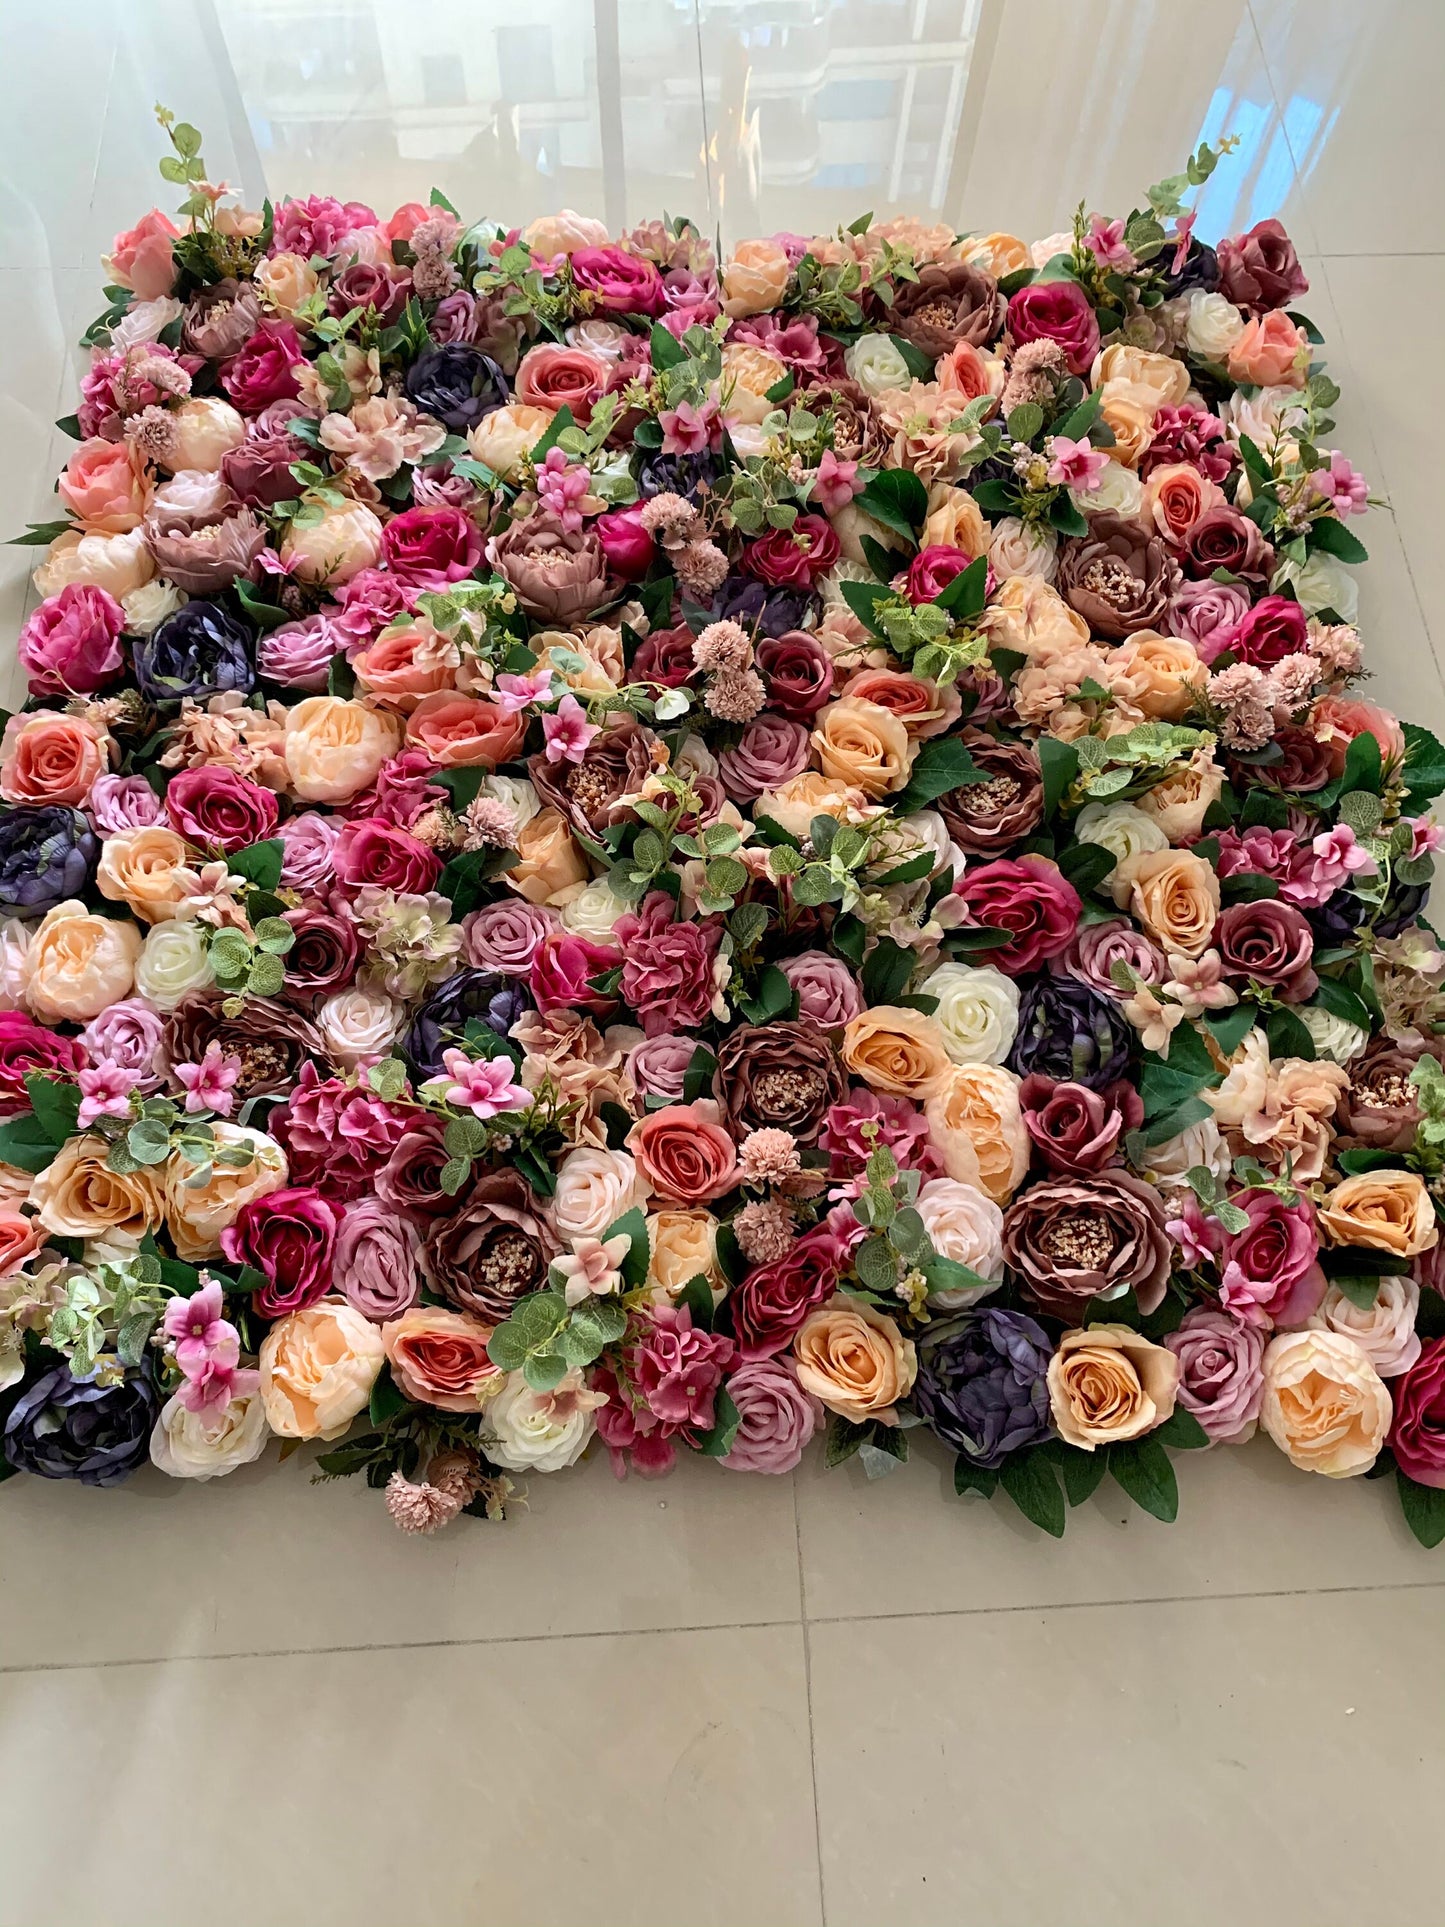 New Design Artifical Flower Wall For Wedding Arrangement Event Salon Party Photography Backdrop Fabric Rolling Up Curtain Fabric Cloth